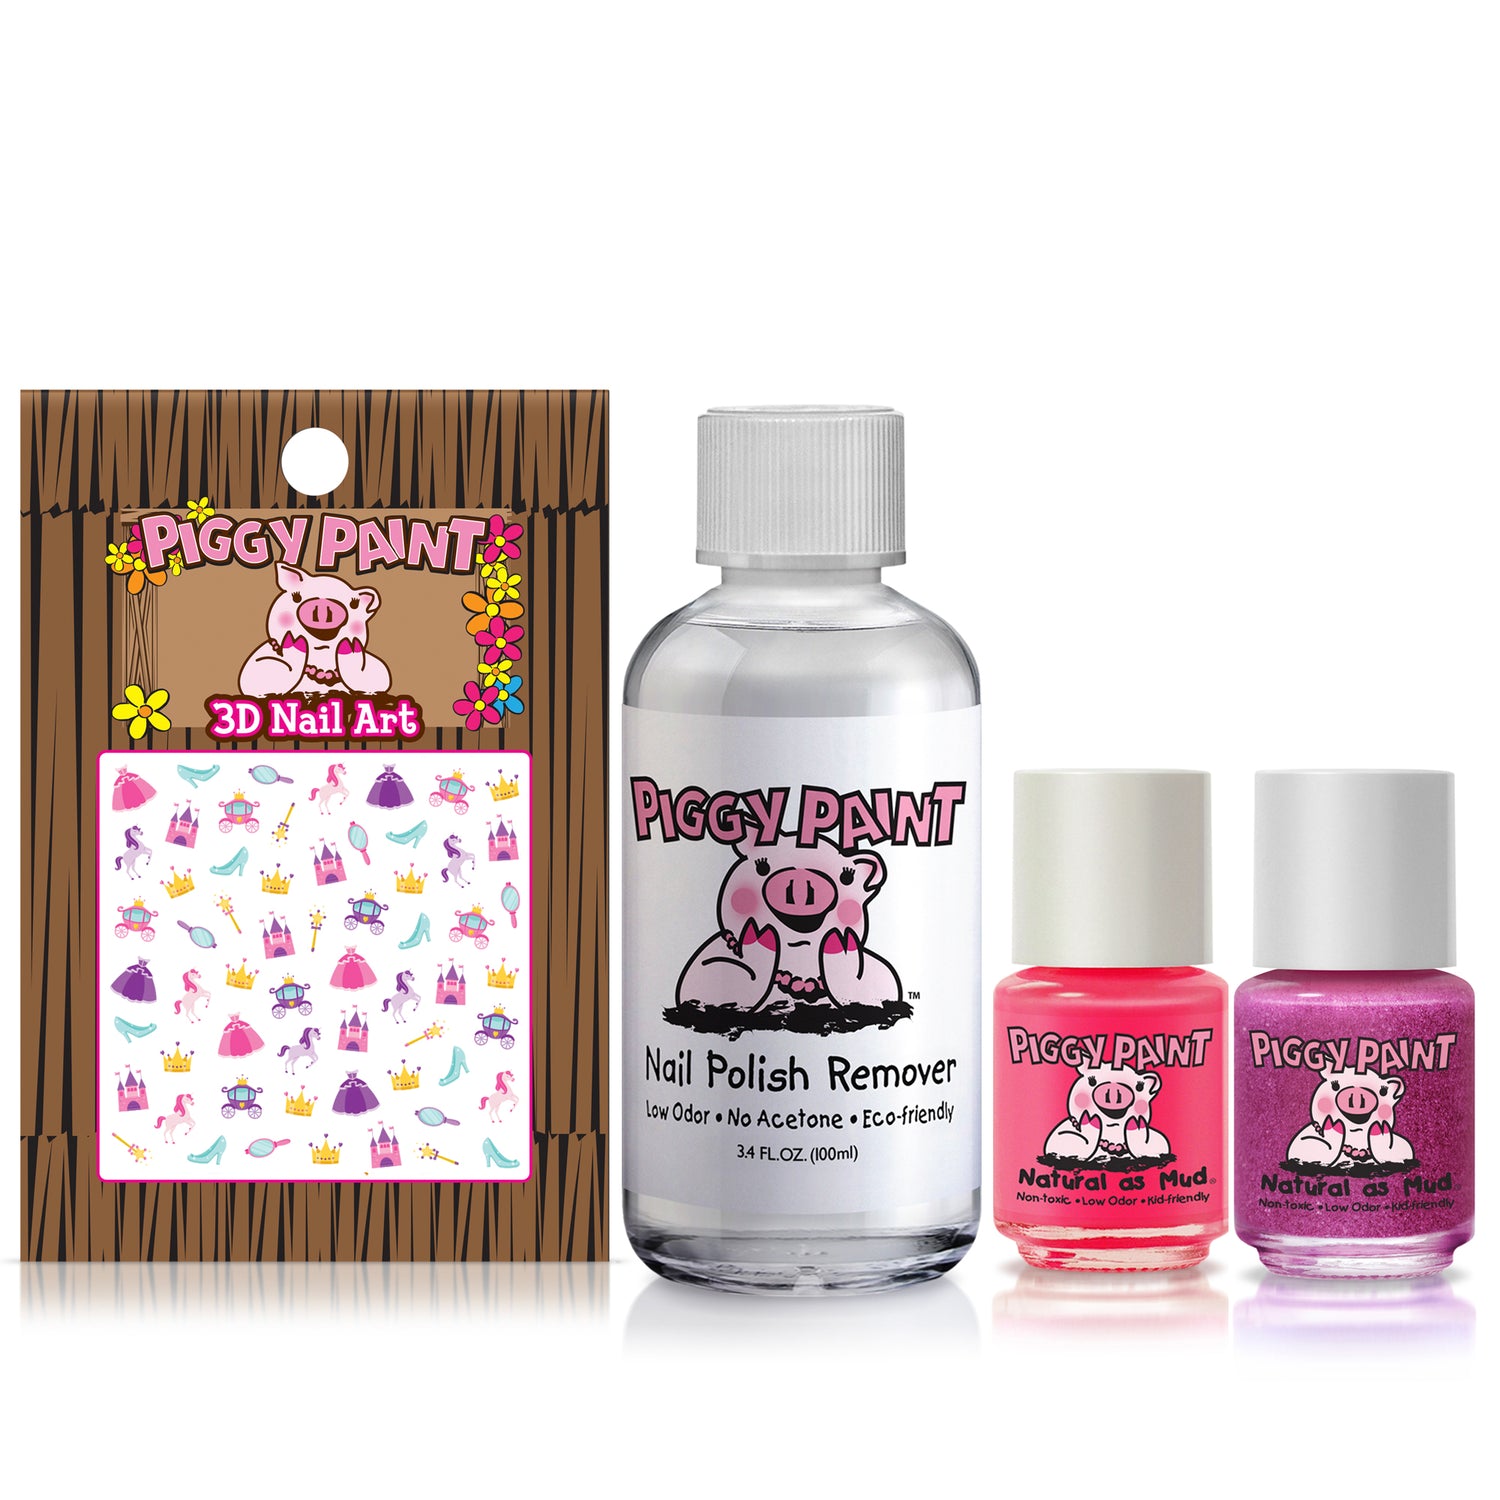 Piggy Paint - Four Pack Nail Polish LOL, Sea-Quin, Glamour Girl, & Basecoat + Topcoat (2-in-1)